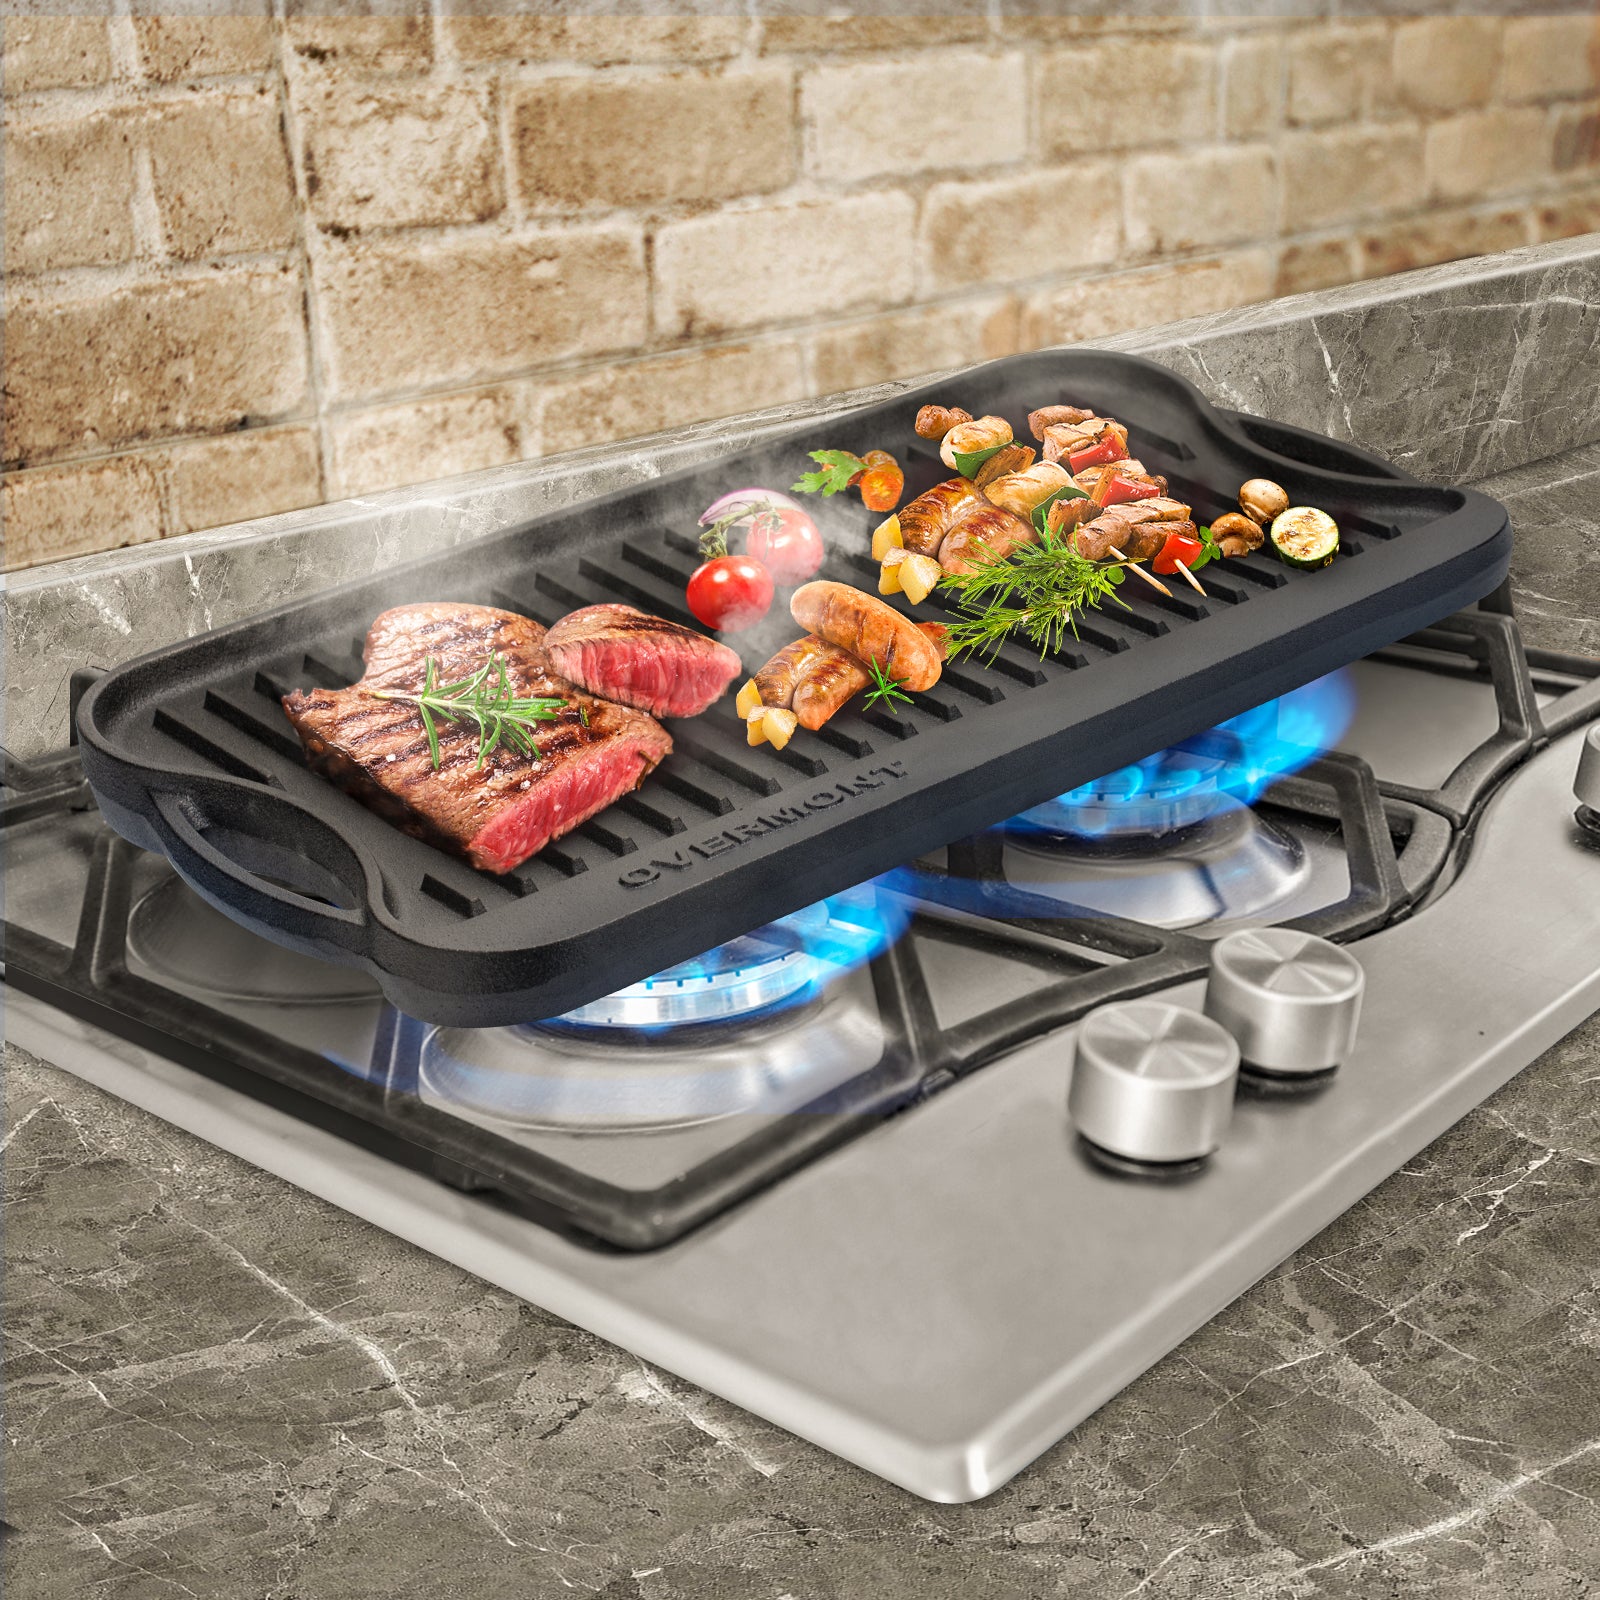 Reversible Grill Pan use